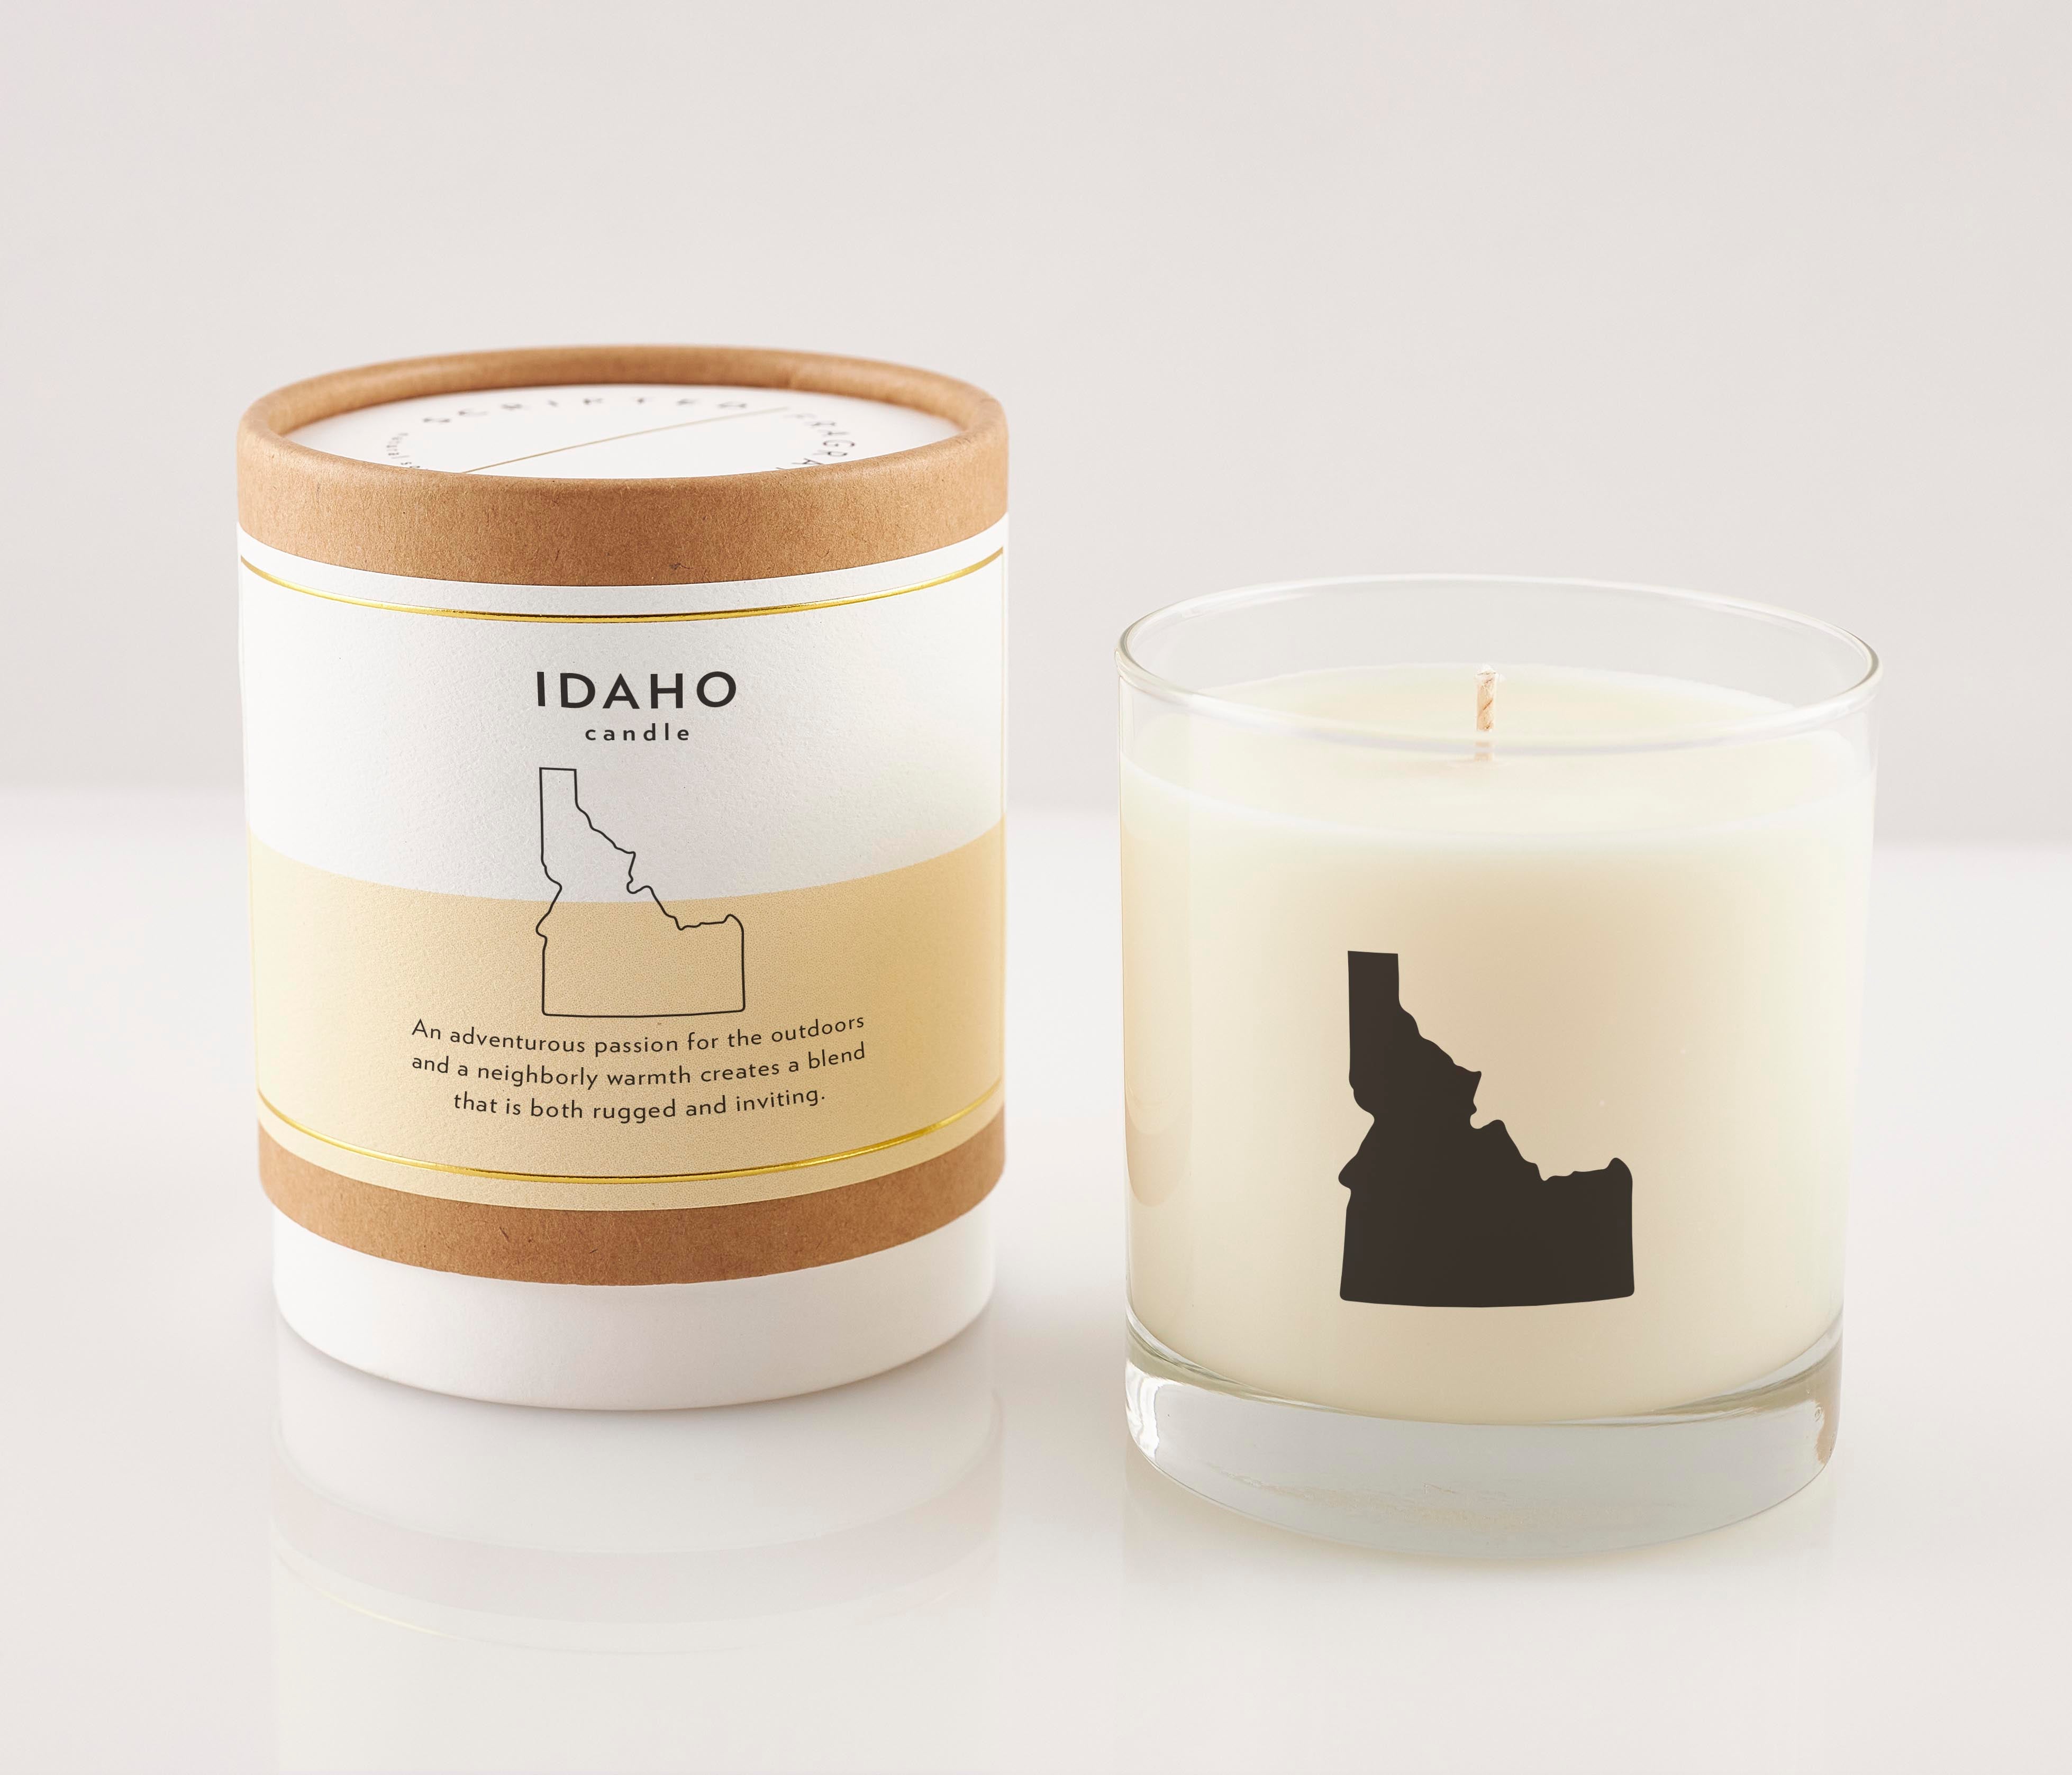 Fusion Soy & Paraffin Container Blend - All Australian Candle